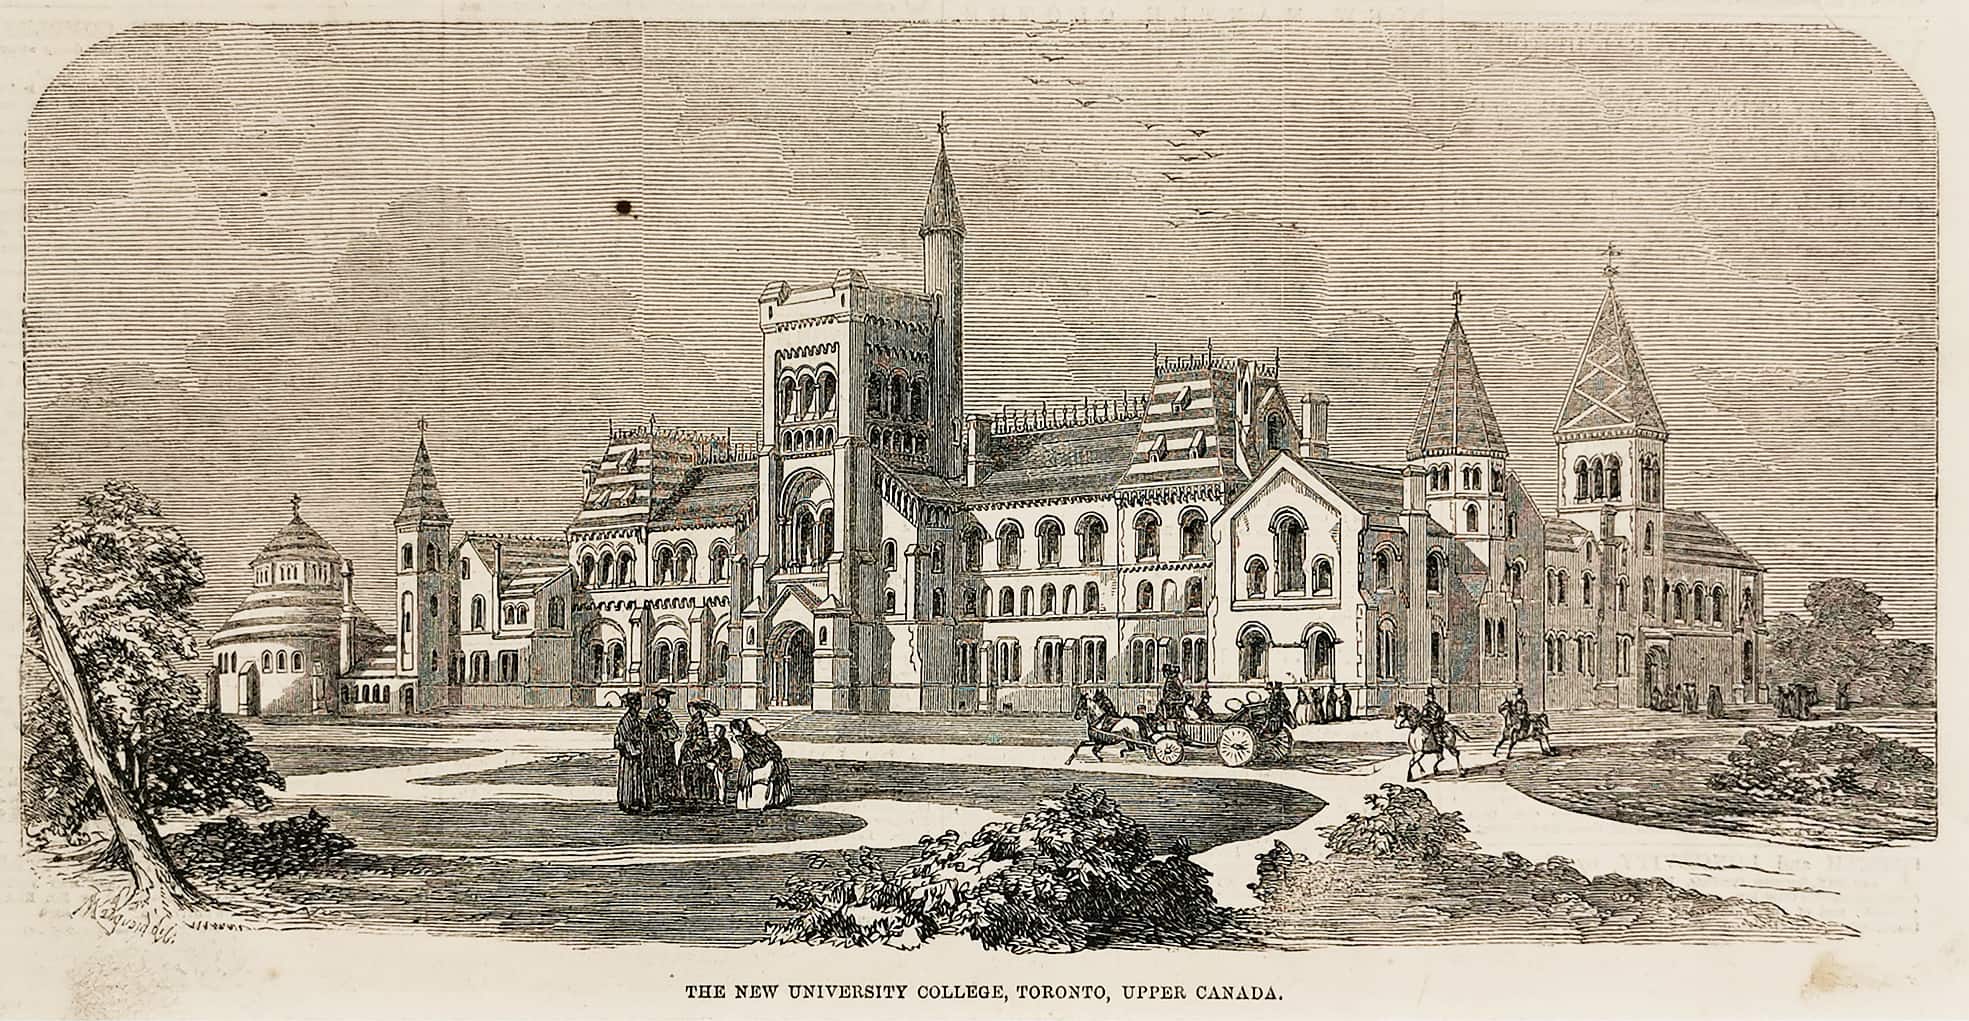 The New University College, Toronto, Upper Canada. - Antique View from 1859